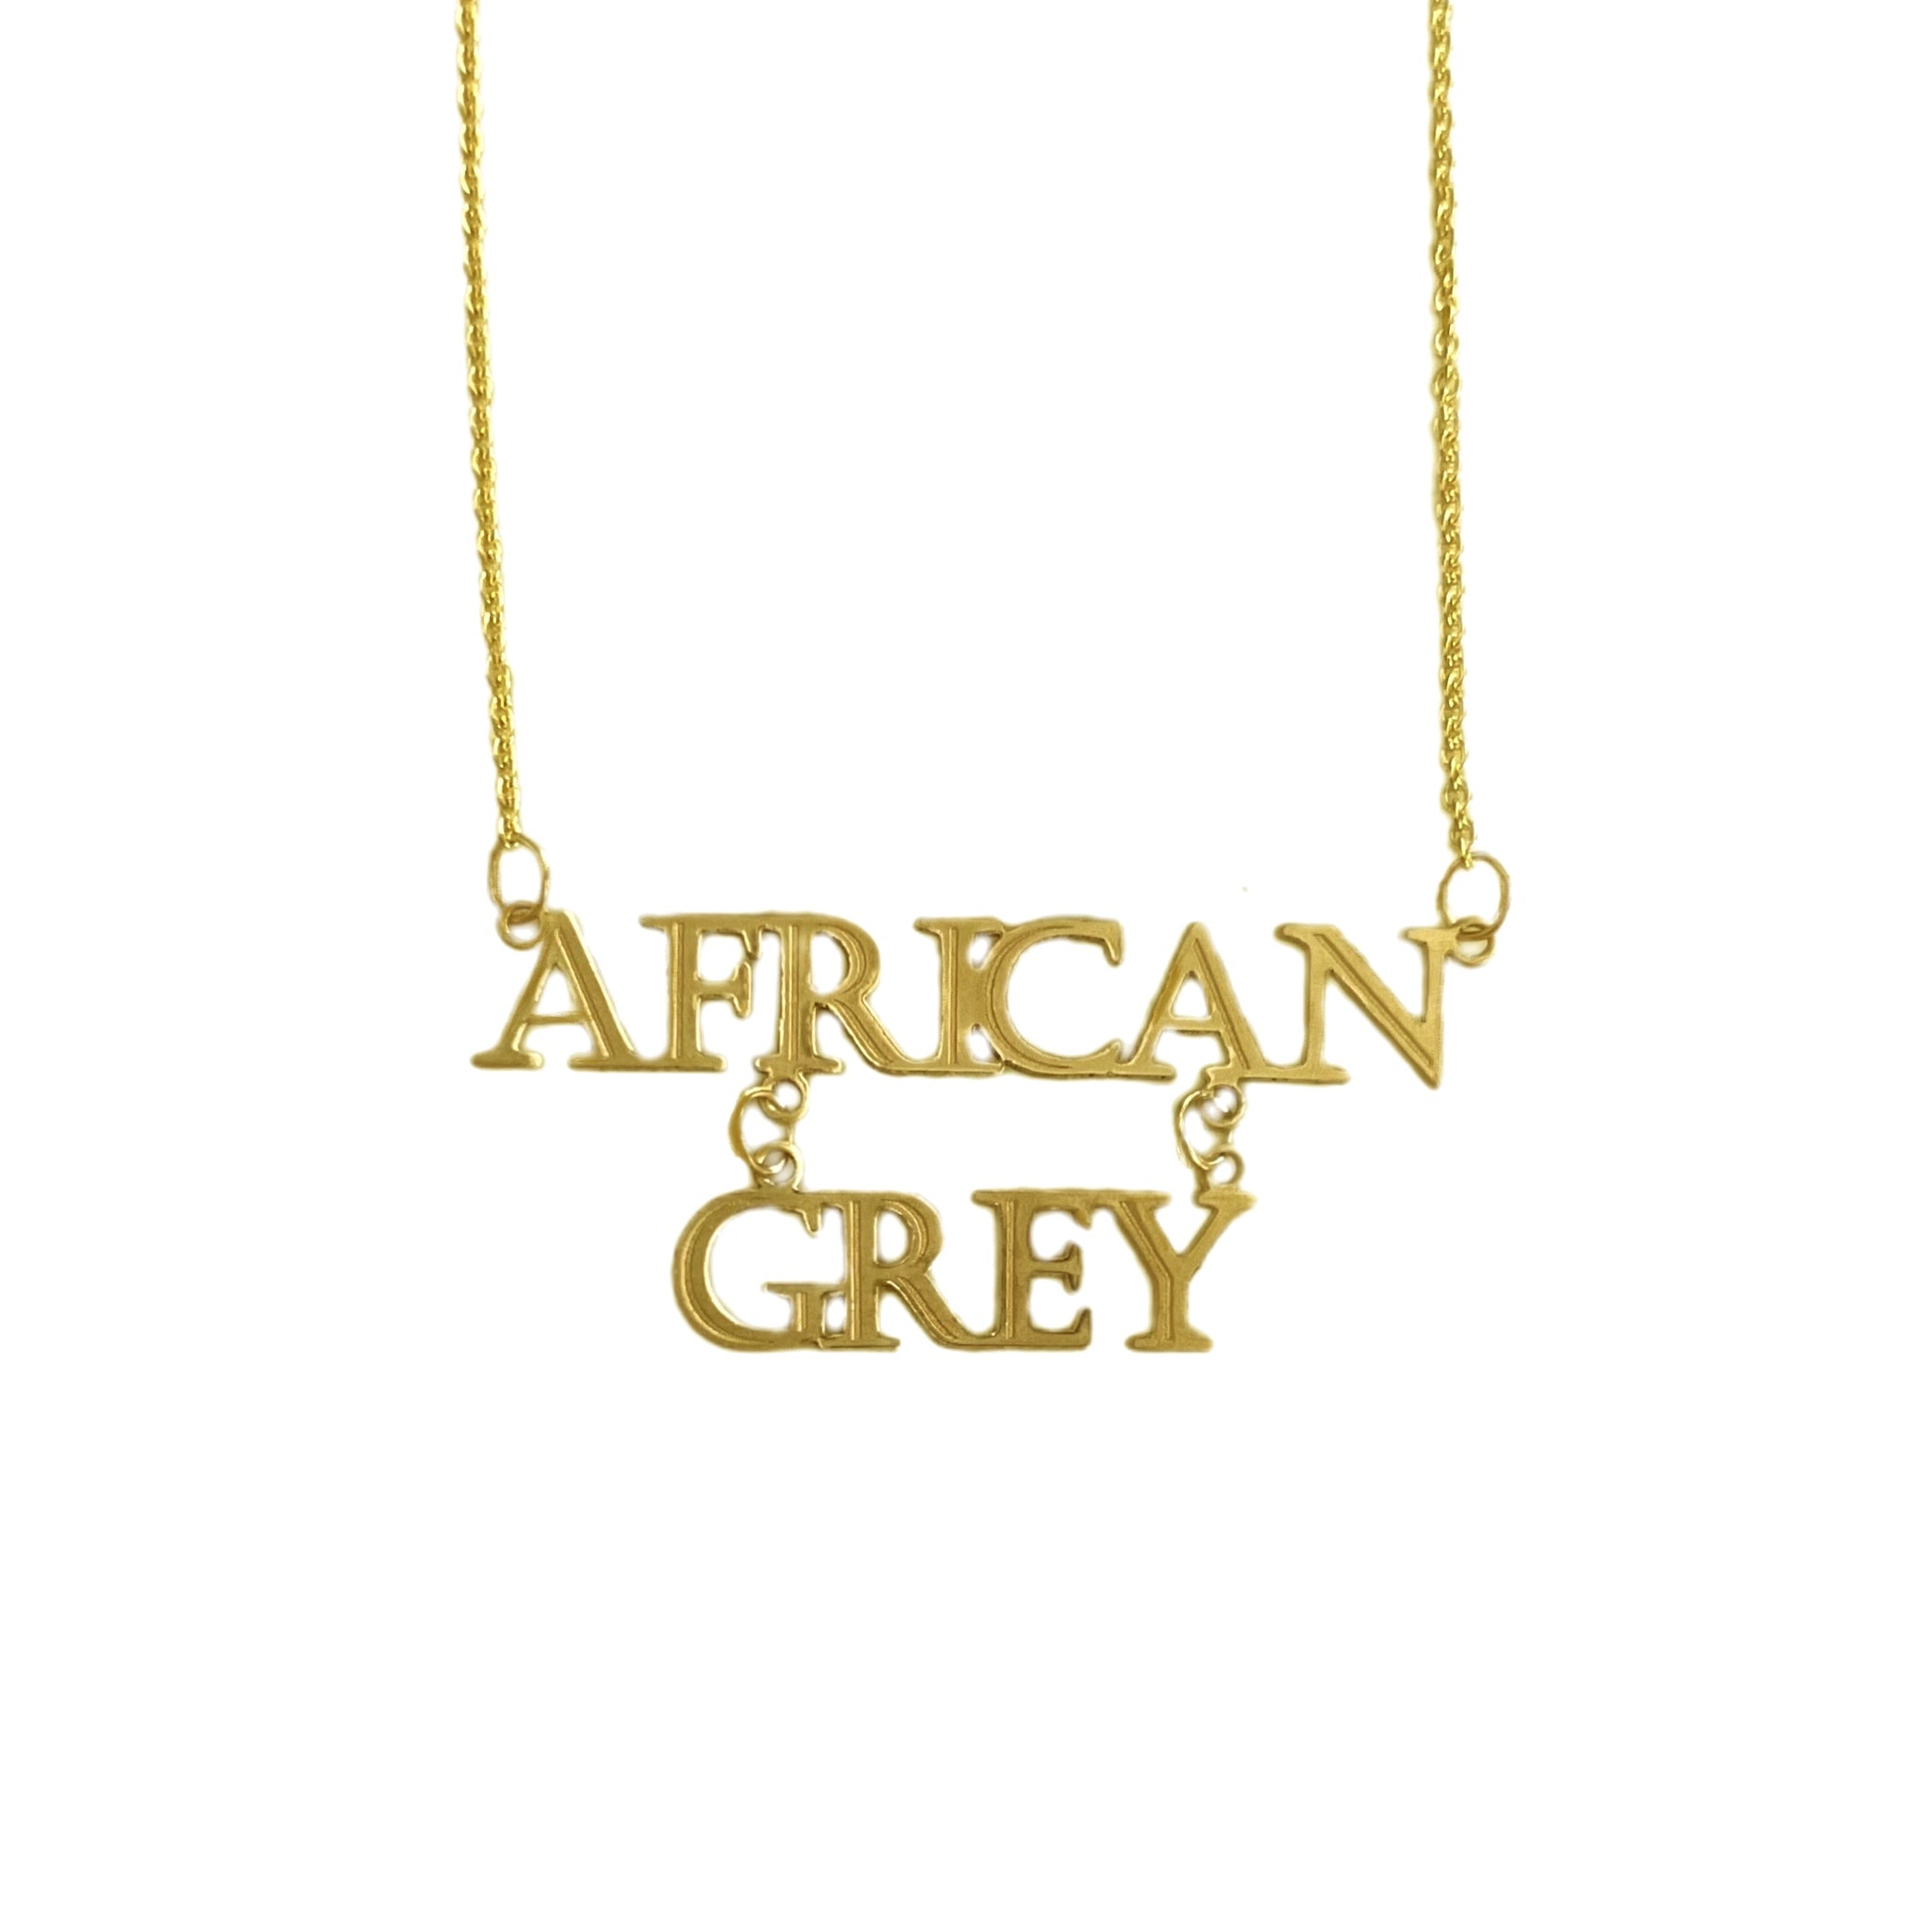 AFRICAN GREY NECKLACE